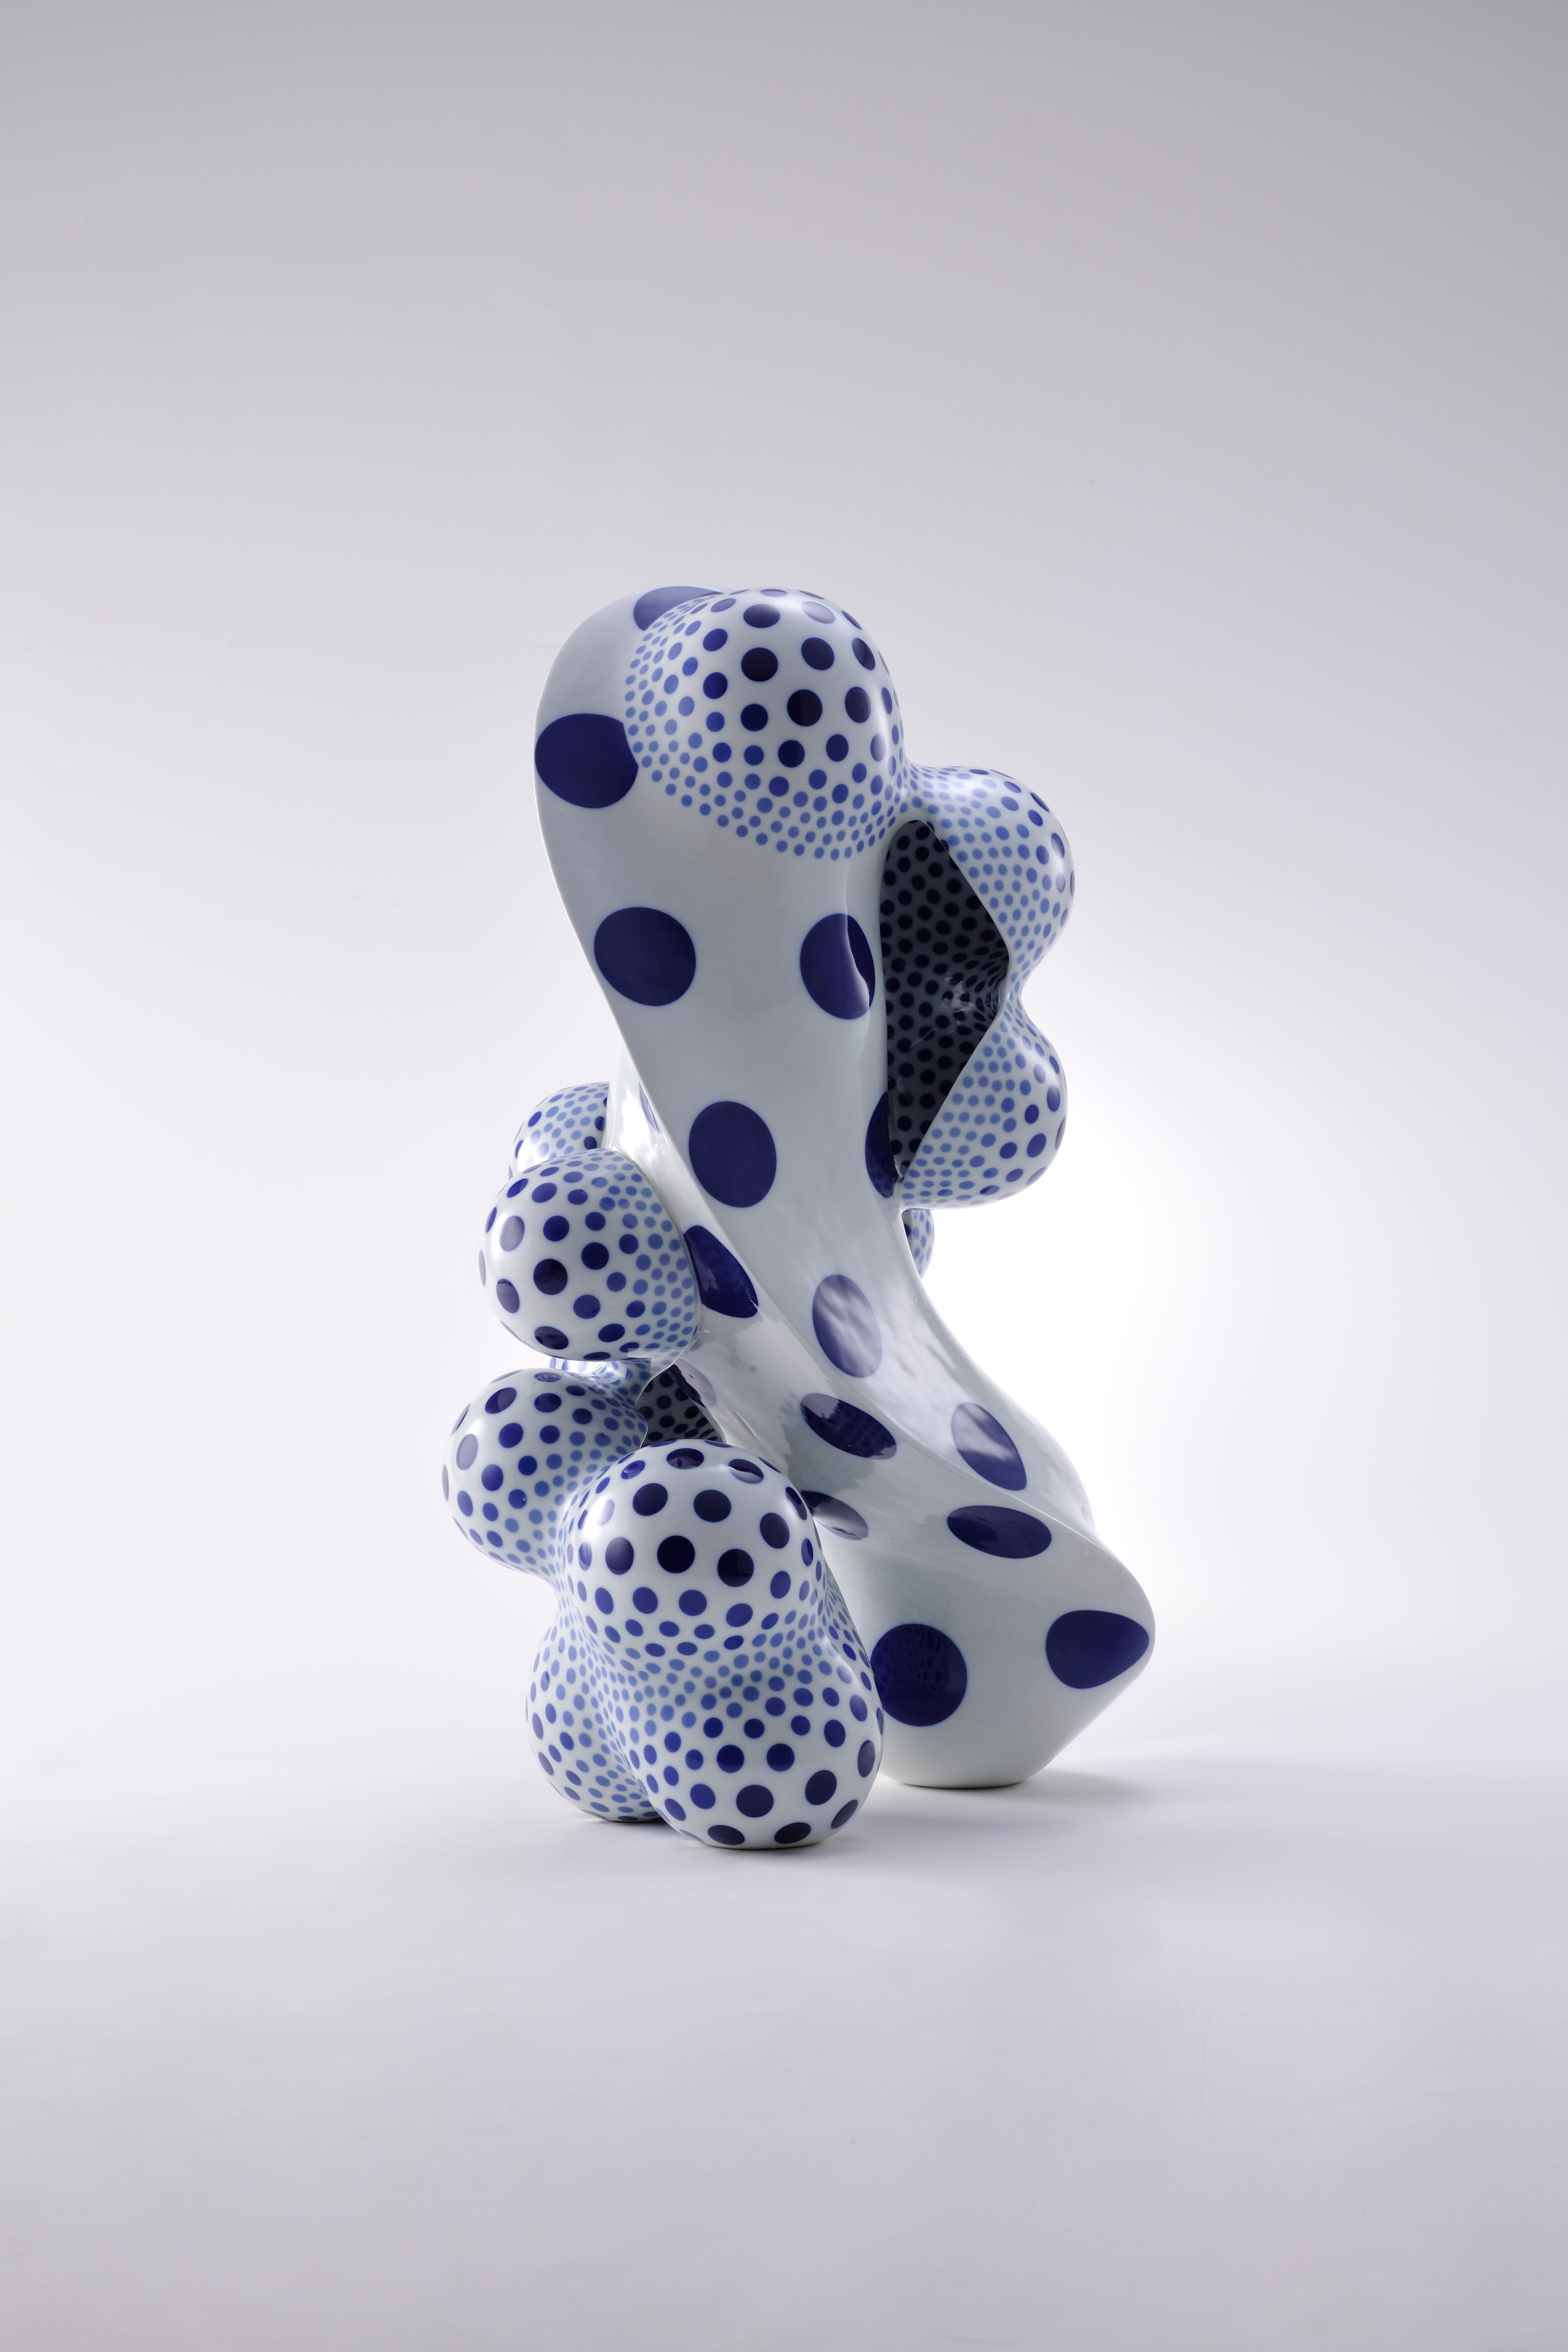 Harumi Nakashima Abstract Sculpture - A Disclosing Form 1607, Contemporary Porcelain Sculpture with Glaze, Biomorphic